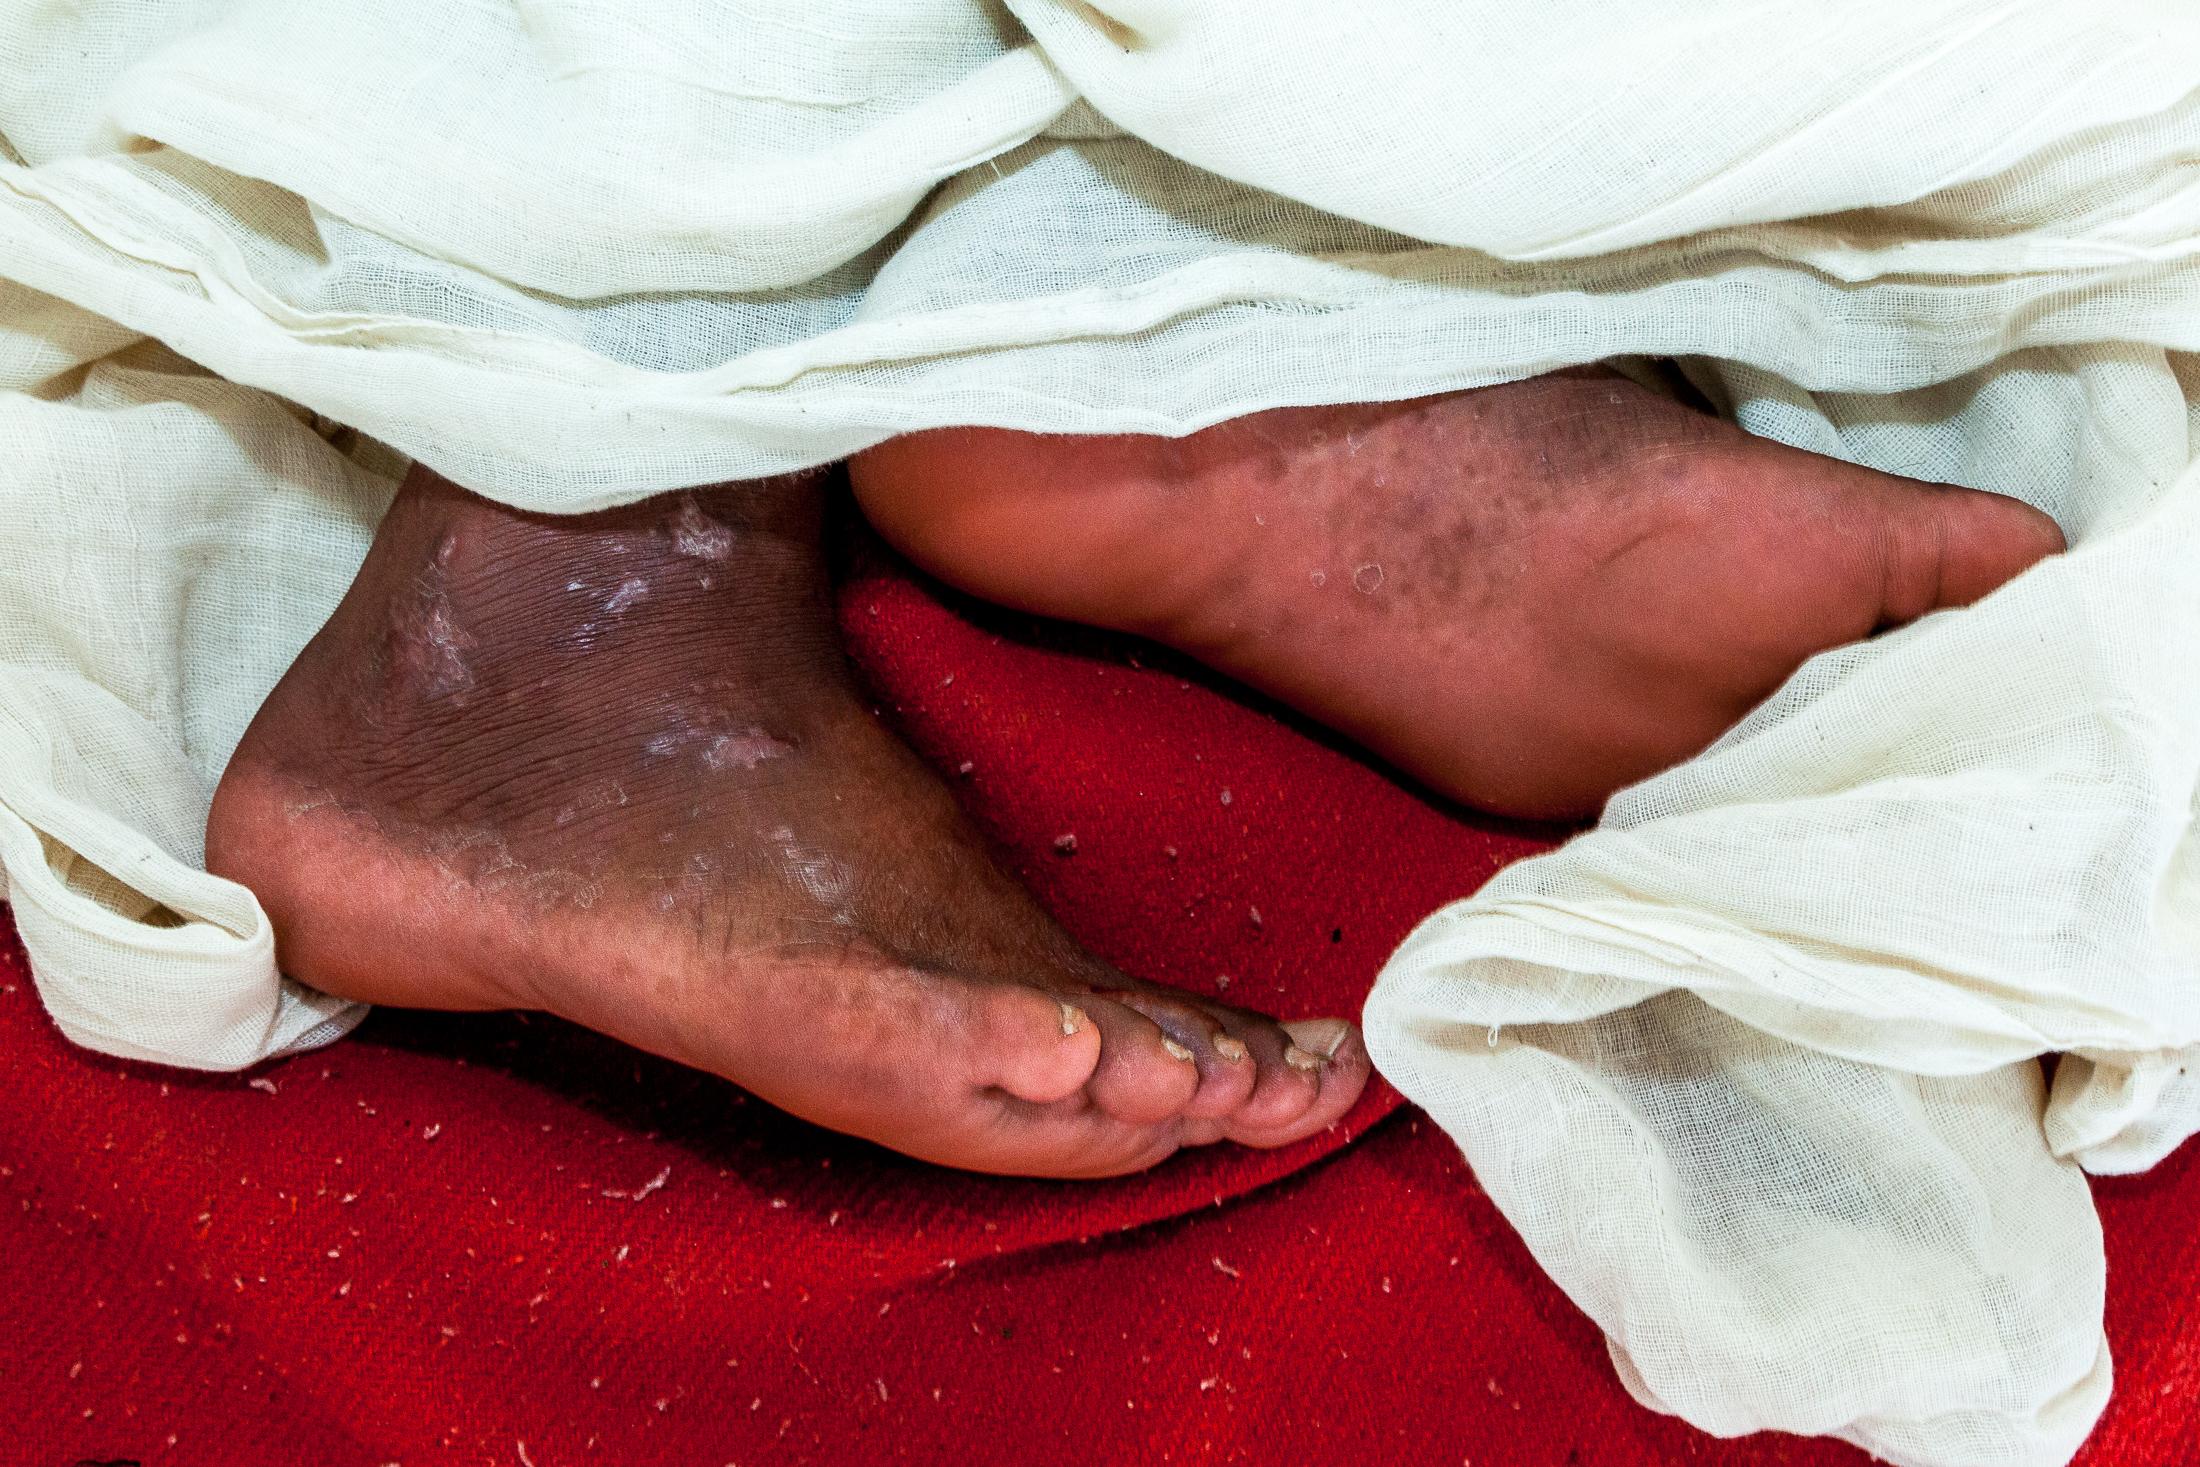 The Forgotten - LELE, NEPAL - JANUARY 24: A man affected by leprosy lays...